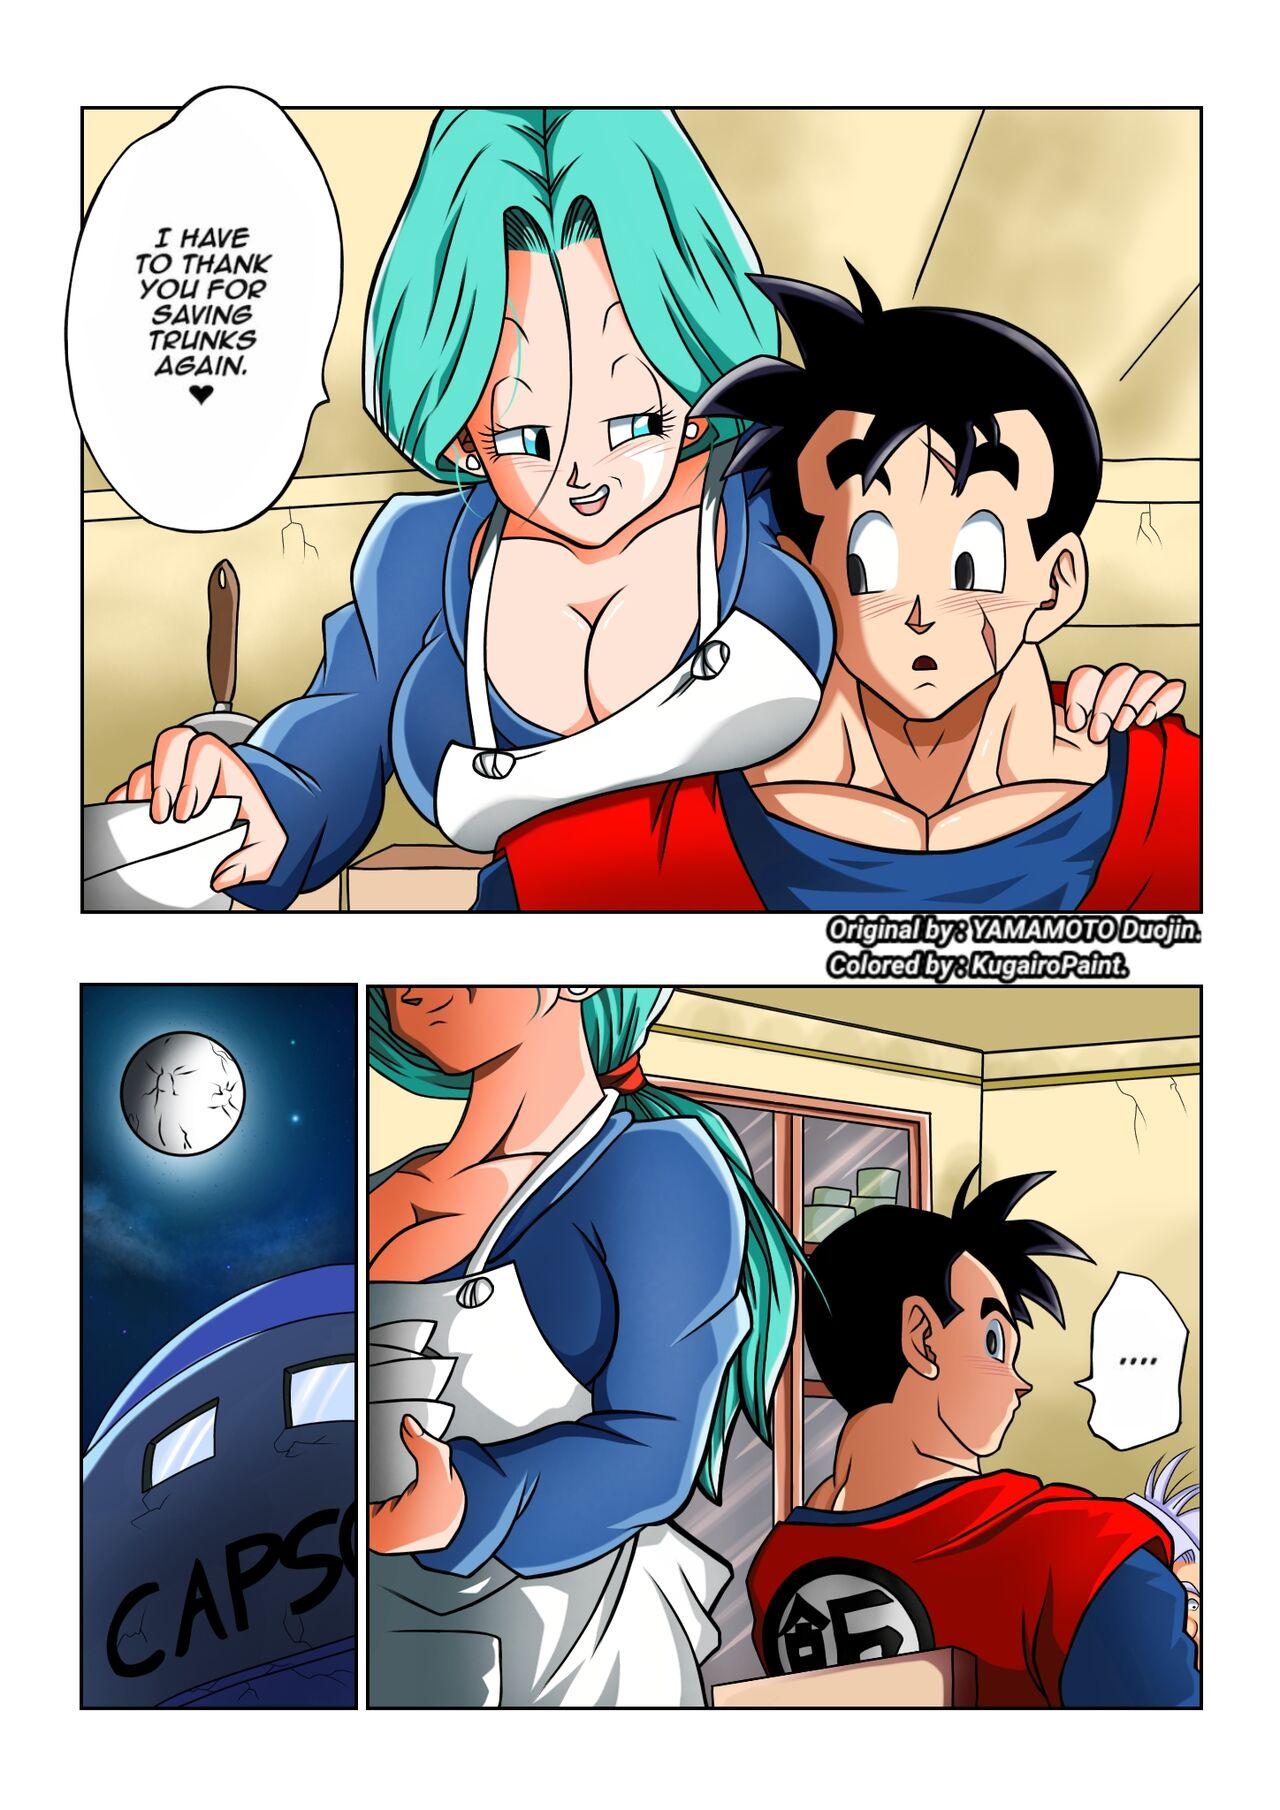 Boquete Lots of Sex in this Future!! - Dragon ball z Watersports - Page 4